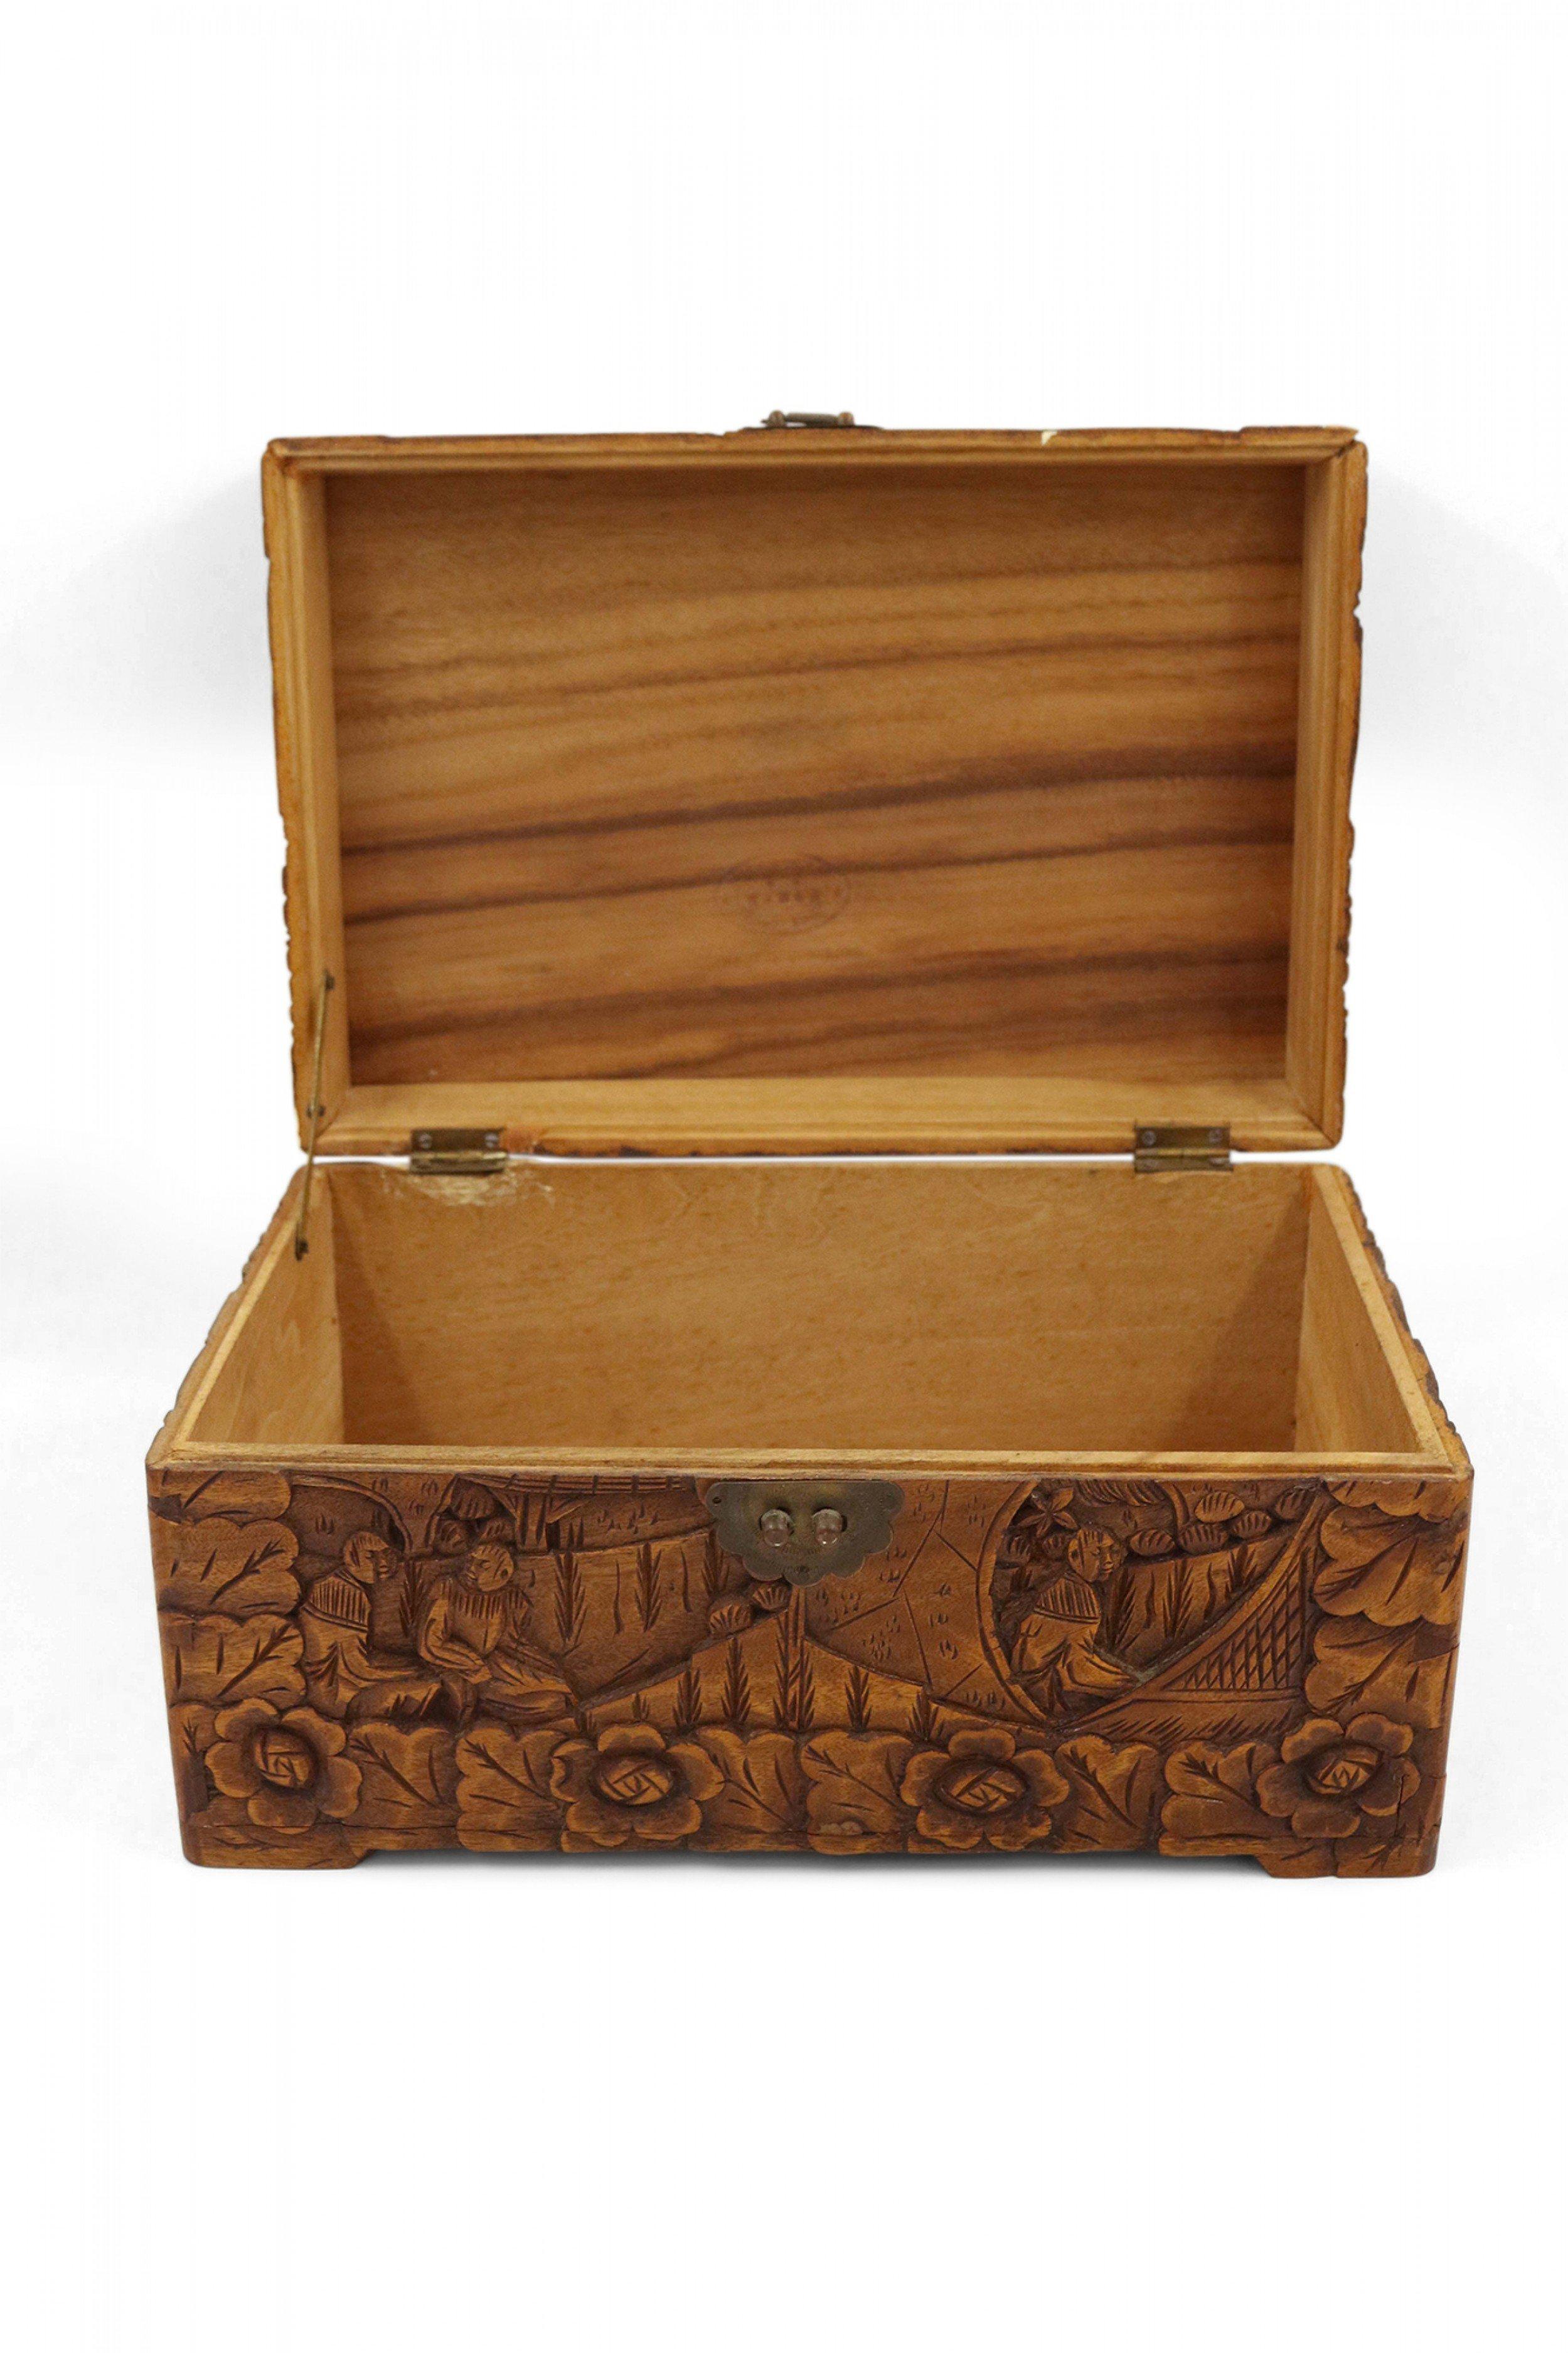 Mid-century Chinese carved wooden box featuring an elaborate scenic design with a hinged top and brass closure hardware. (Stamped HUNG HOP CHEST CO. HONG KONG).
     